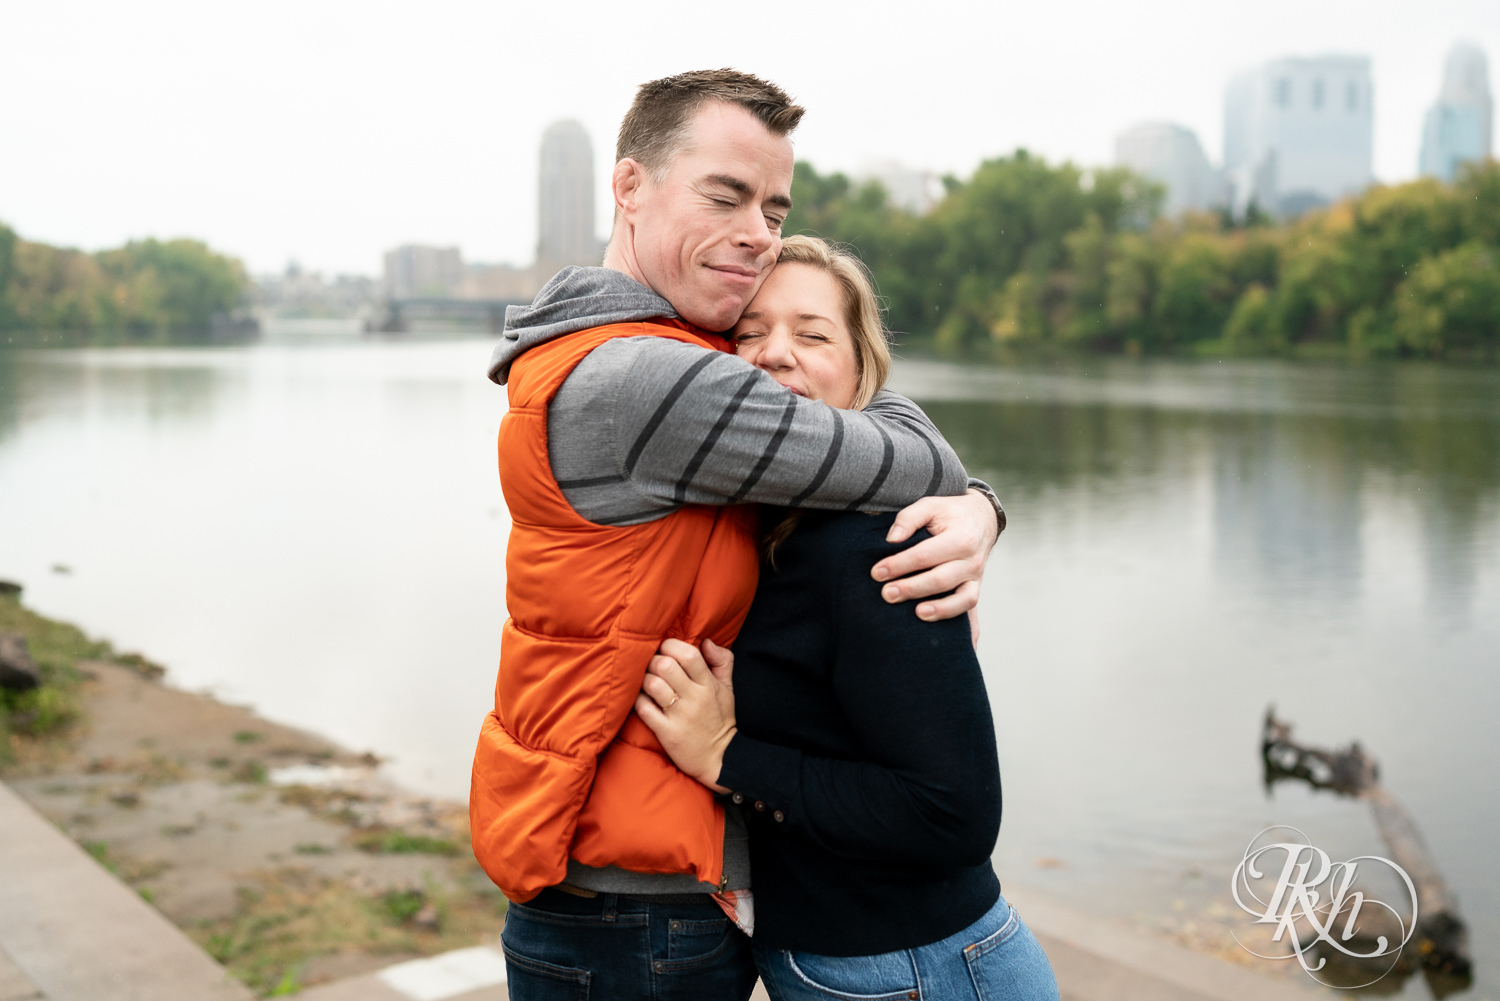 Man and woman in hoodies and jeans snuggle in front of the river during rainy engagement photos at Boom Island Park in Minneapolis, Minnesota.